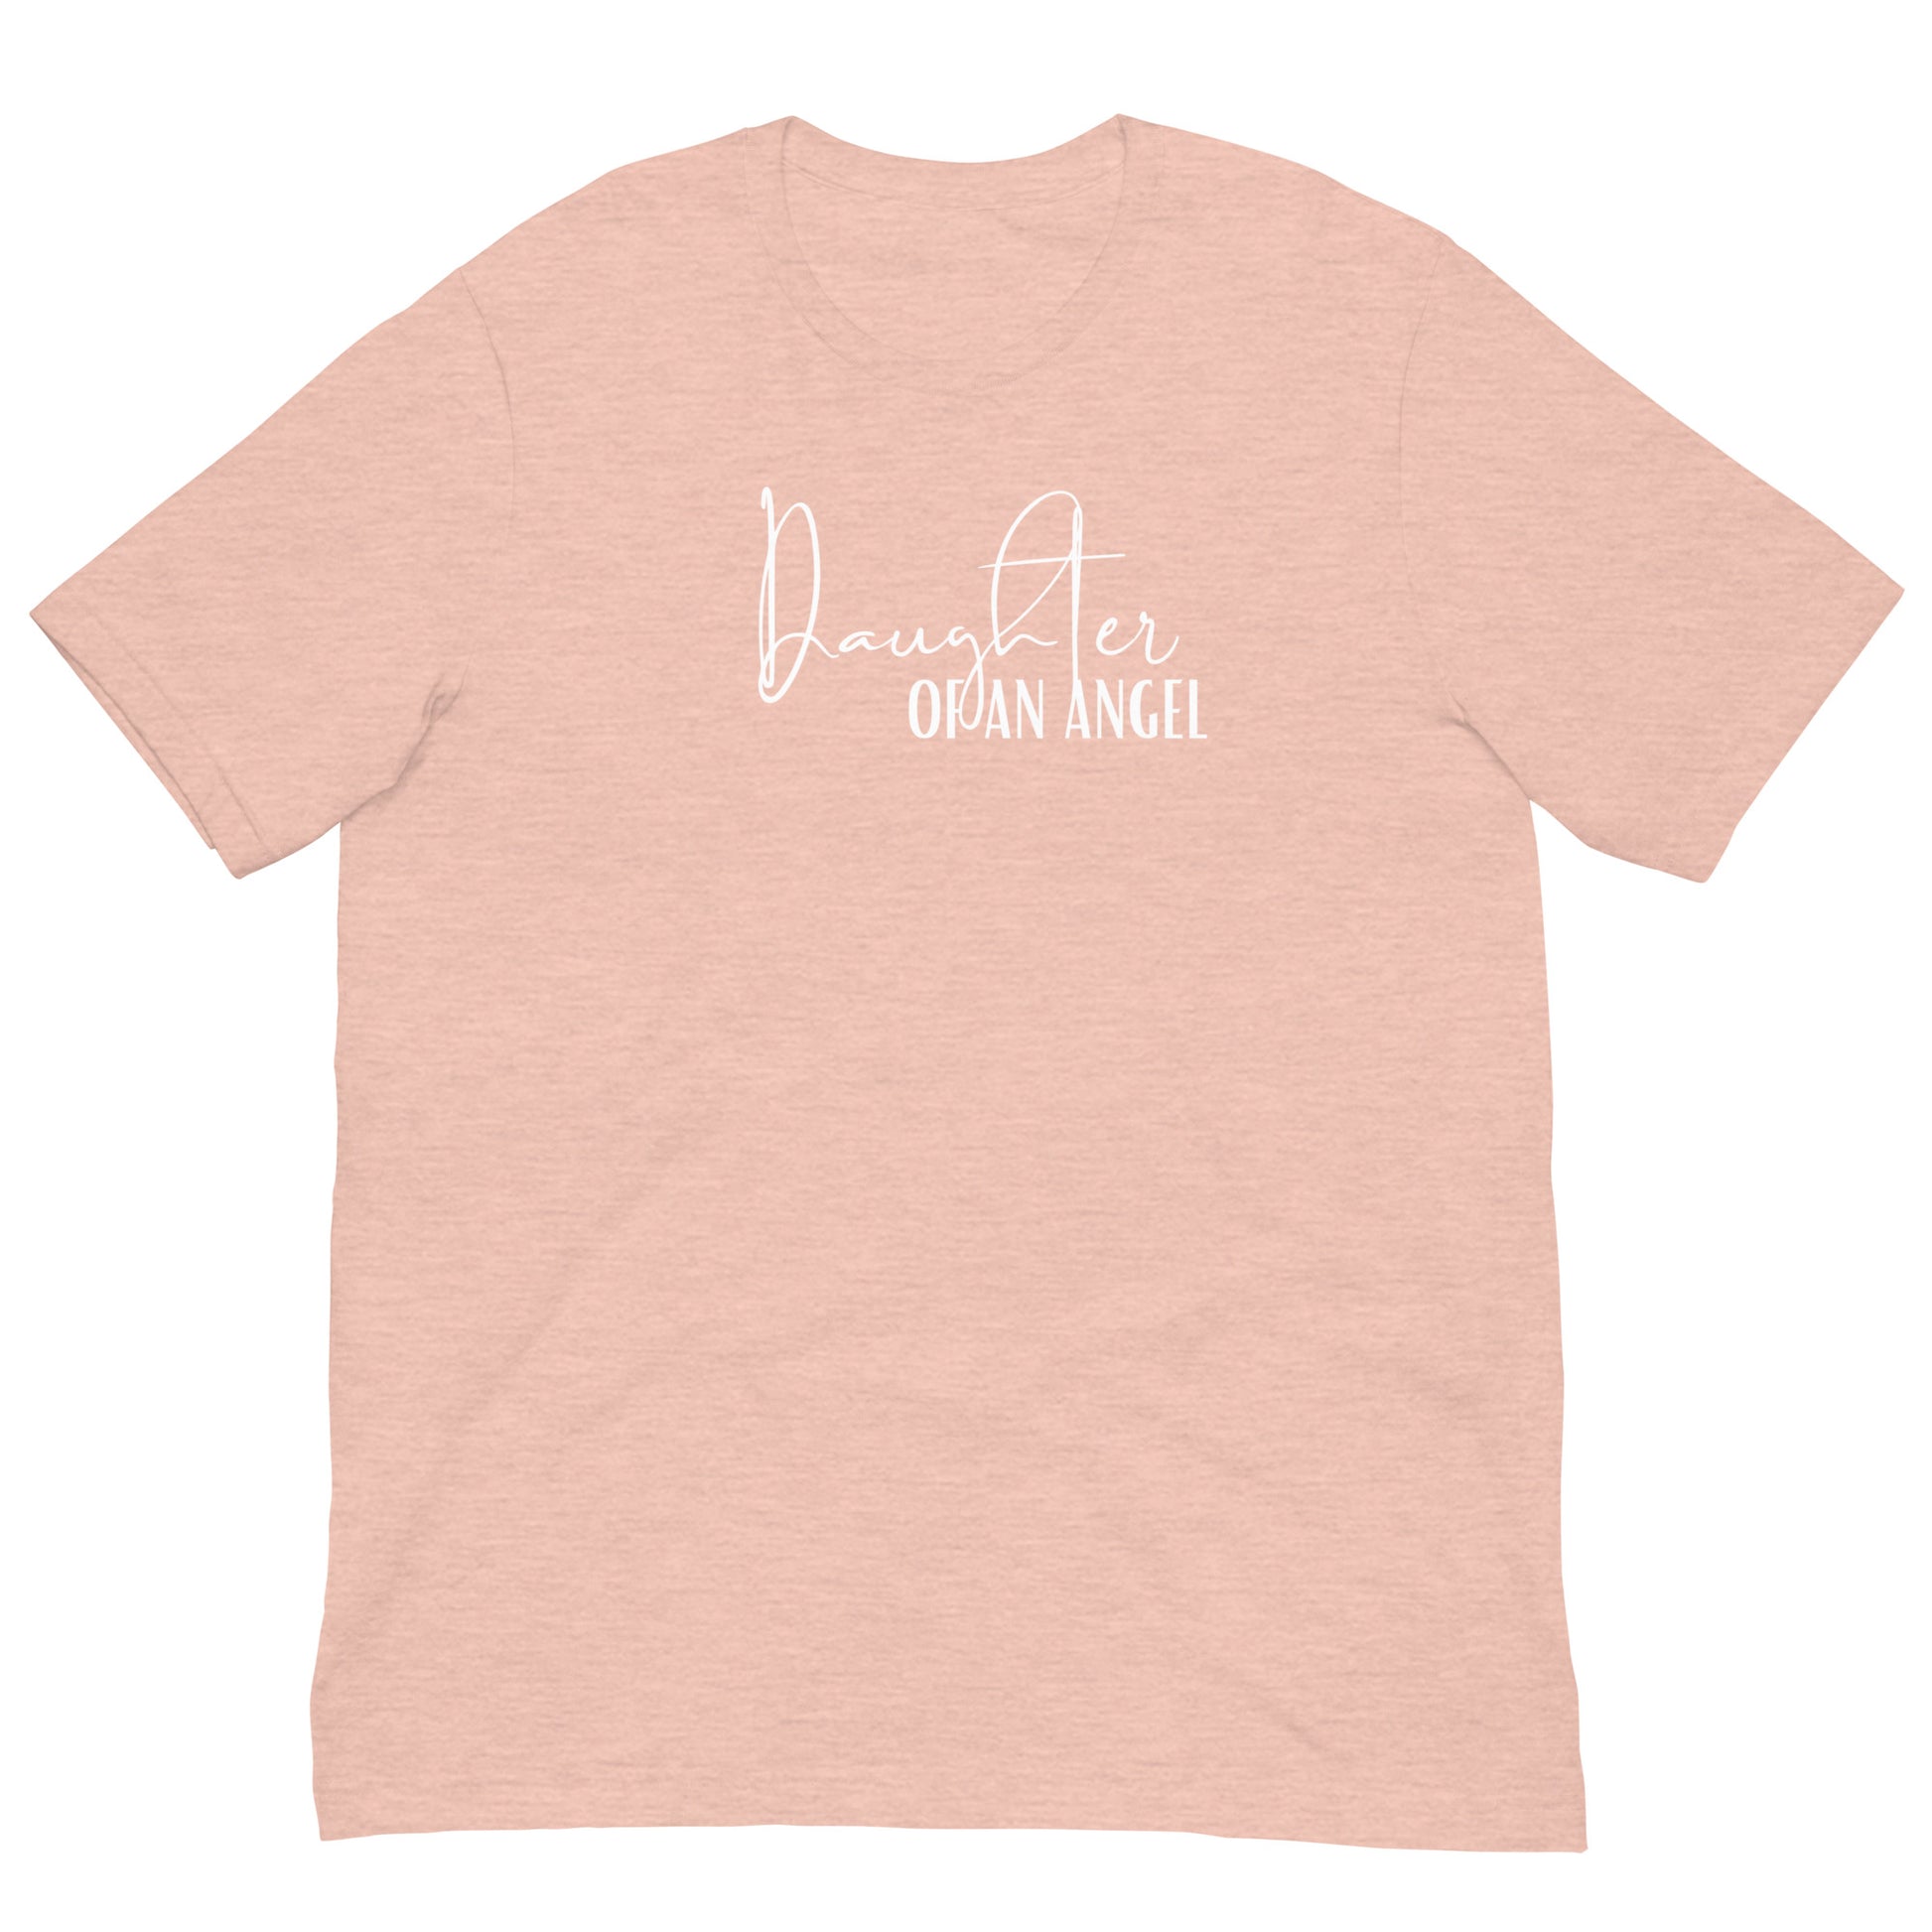 DAUGHTER OF AN ANGEL TEE - Daughter Of An Angel